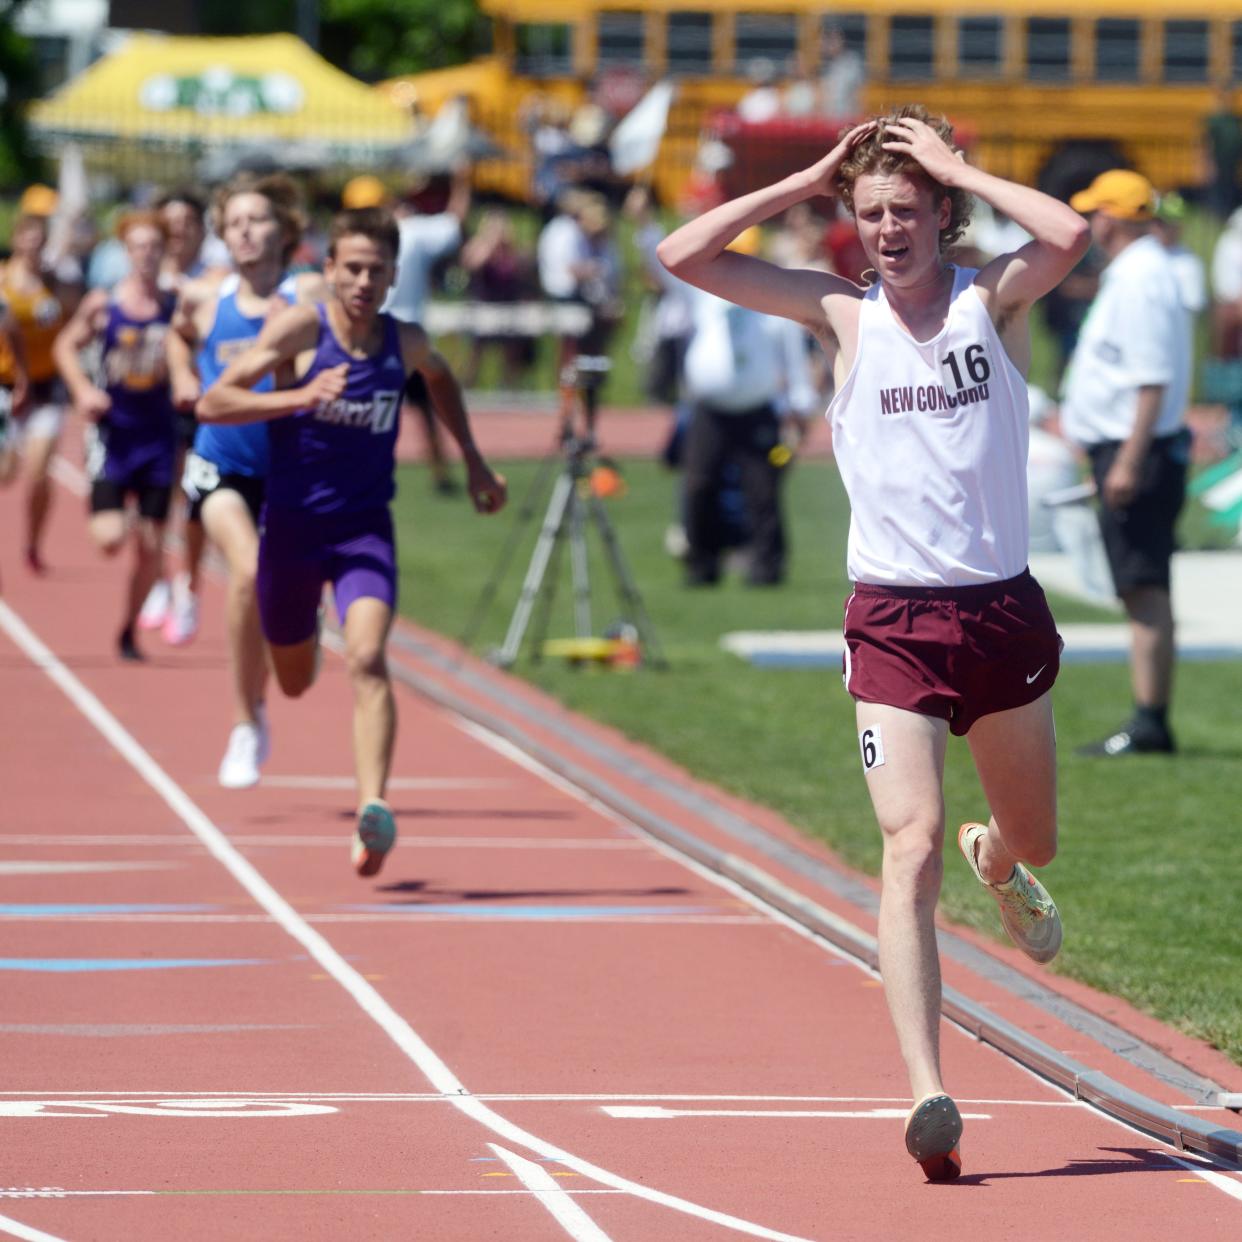 Chris Tooms, of John Glenn, races to a first-place finish in the 3200 meters with a convincing showing at the Division II state track and field meet on Saturday at Jesse Owens Memorial Stadium. Tooms won by more than two seconds to claim the school's second state title in five years.